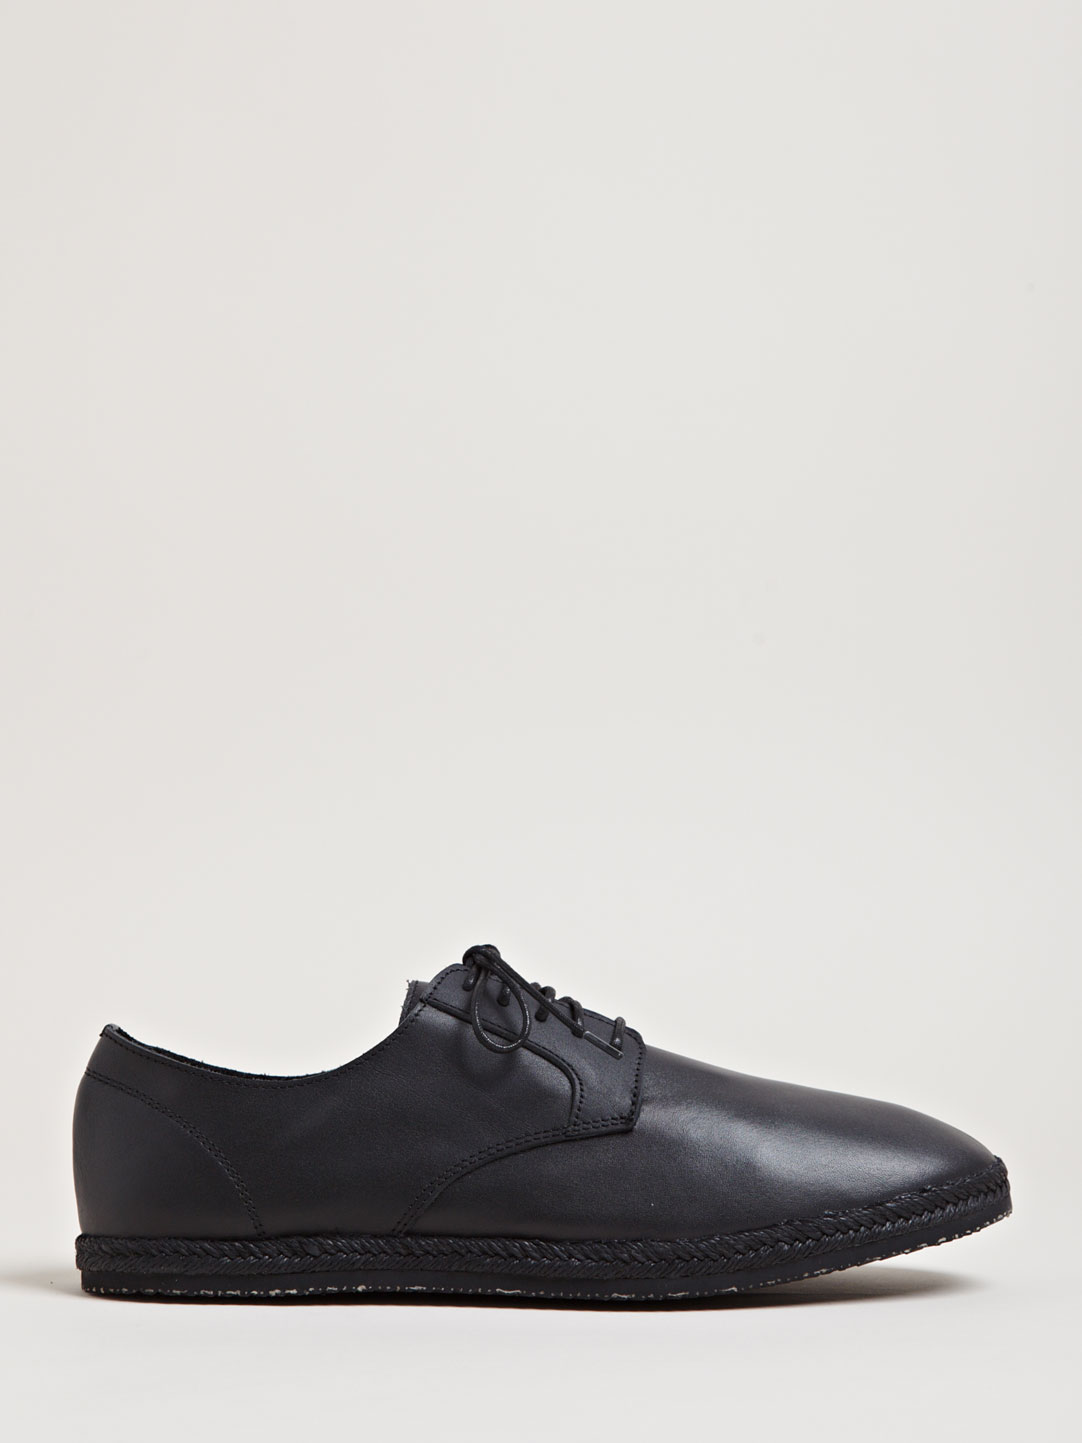 Yohji Yamamoto Plaited Outer Sole Shoes in Black for Men | Lyst